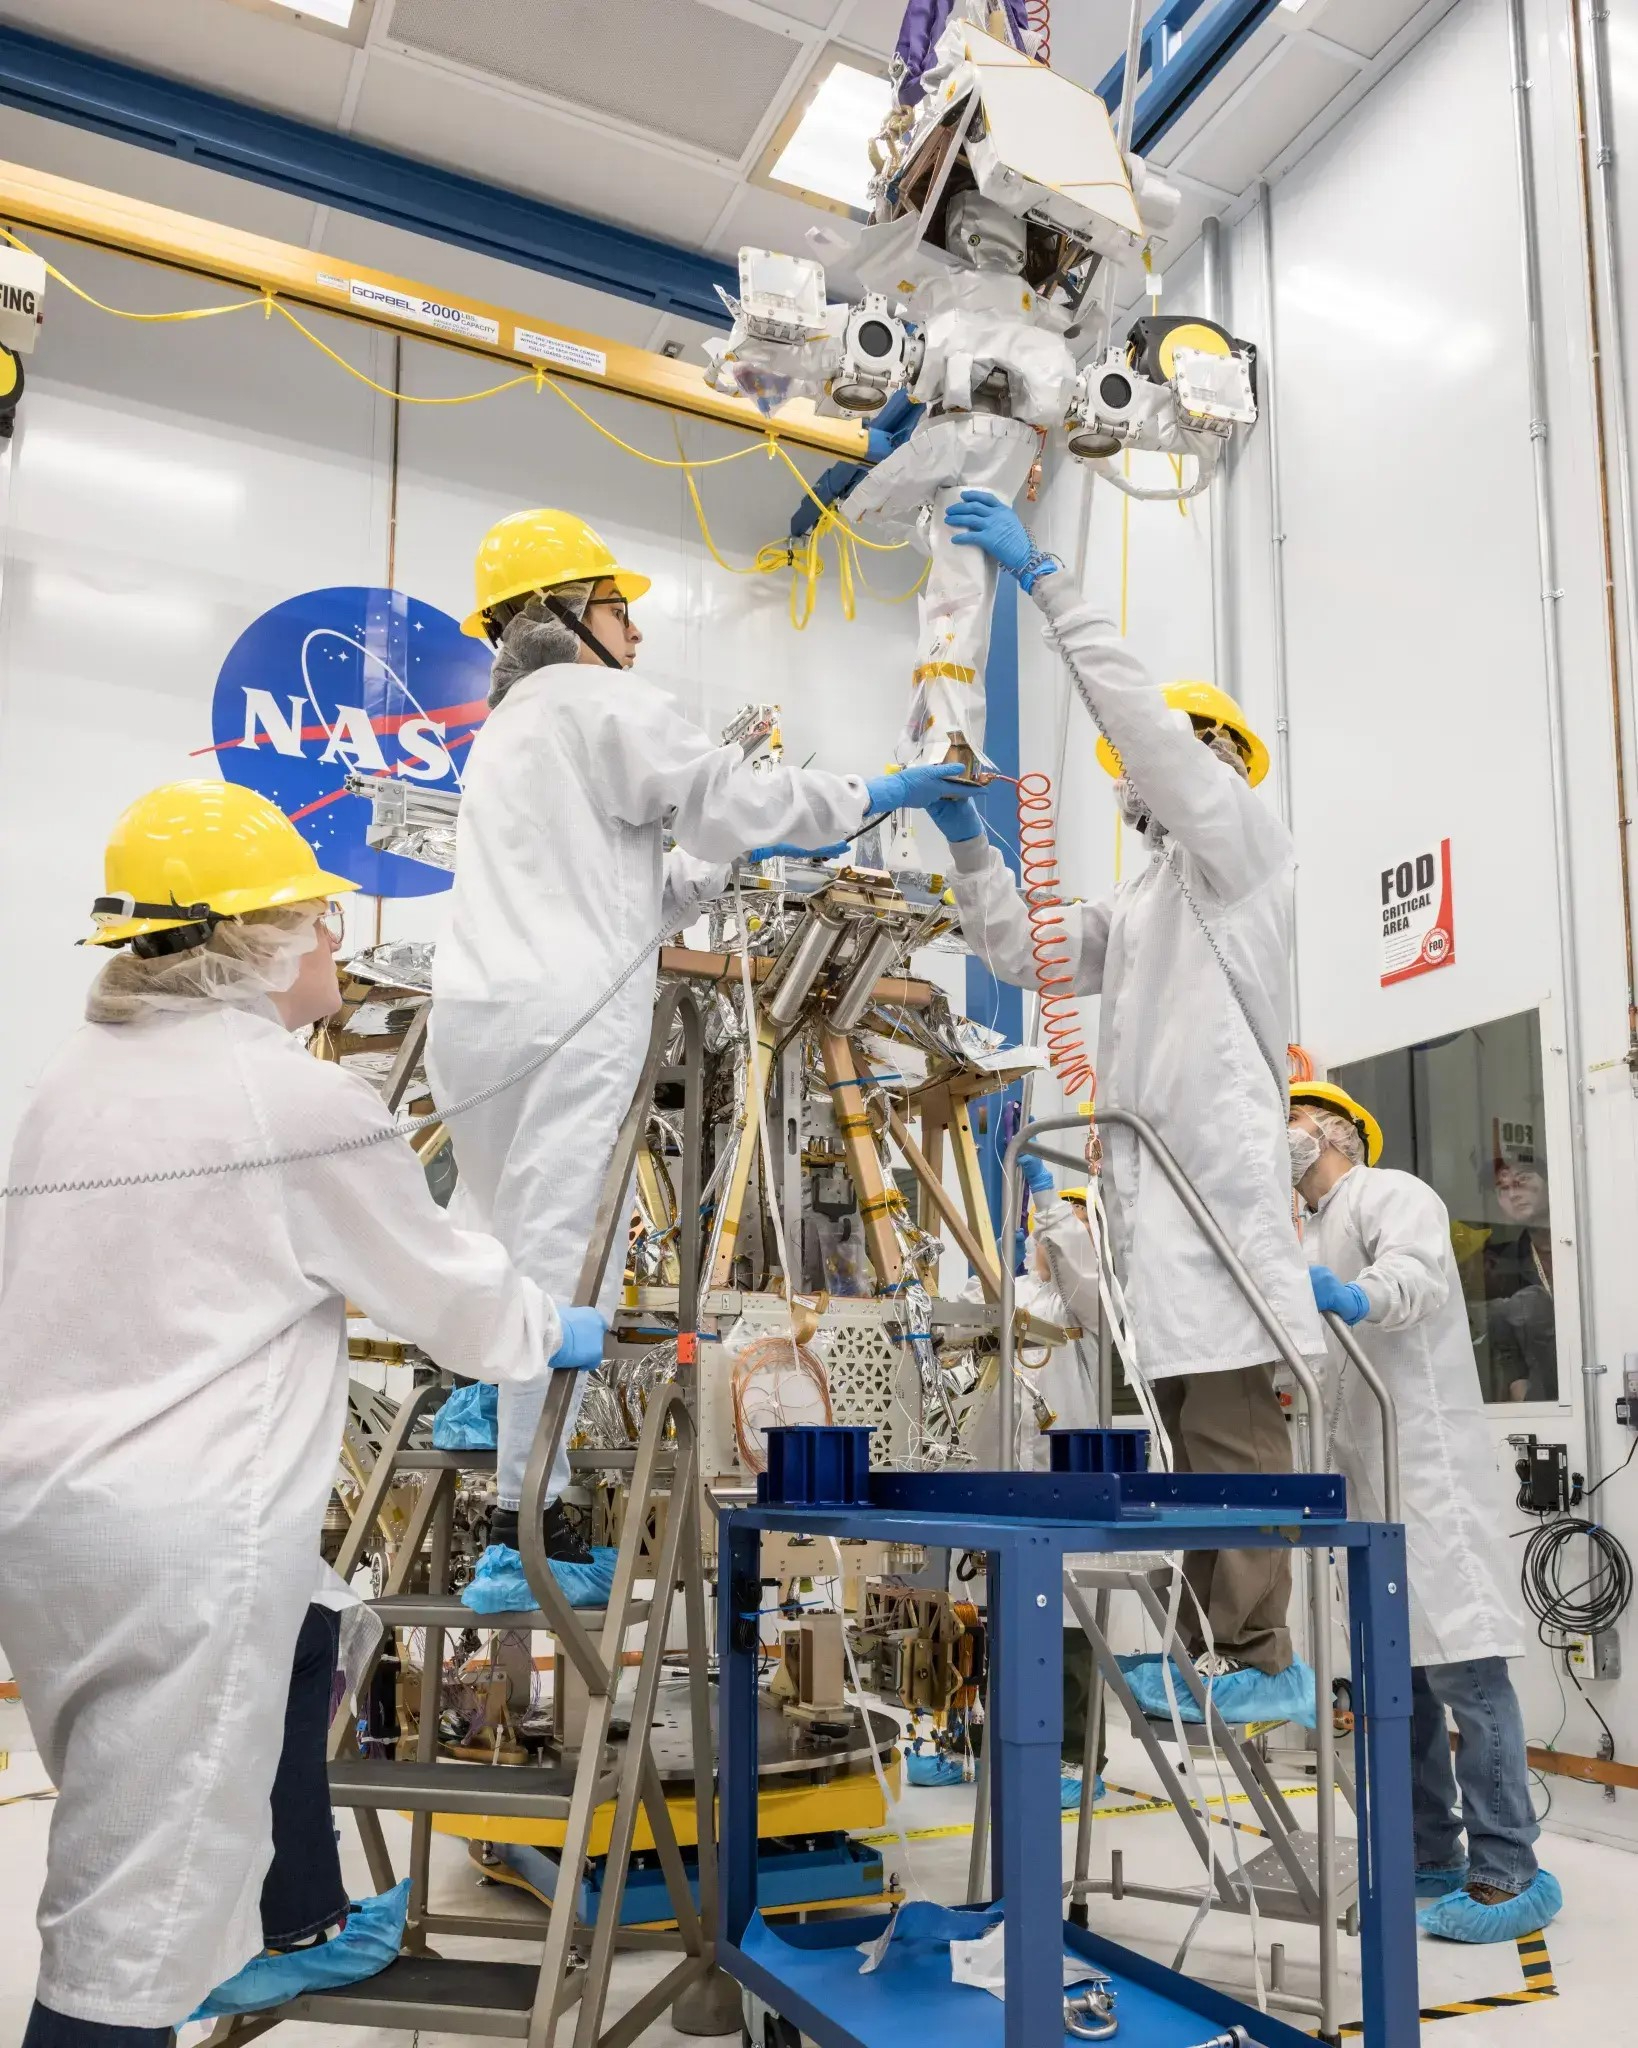 NASA Space Technology Four white-covered, yellow exhausting hat-wearing technicians assemble a robotic explorer in a white room.